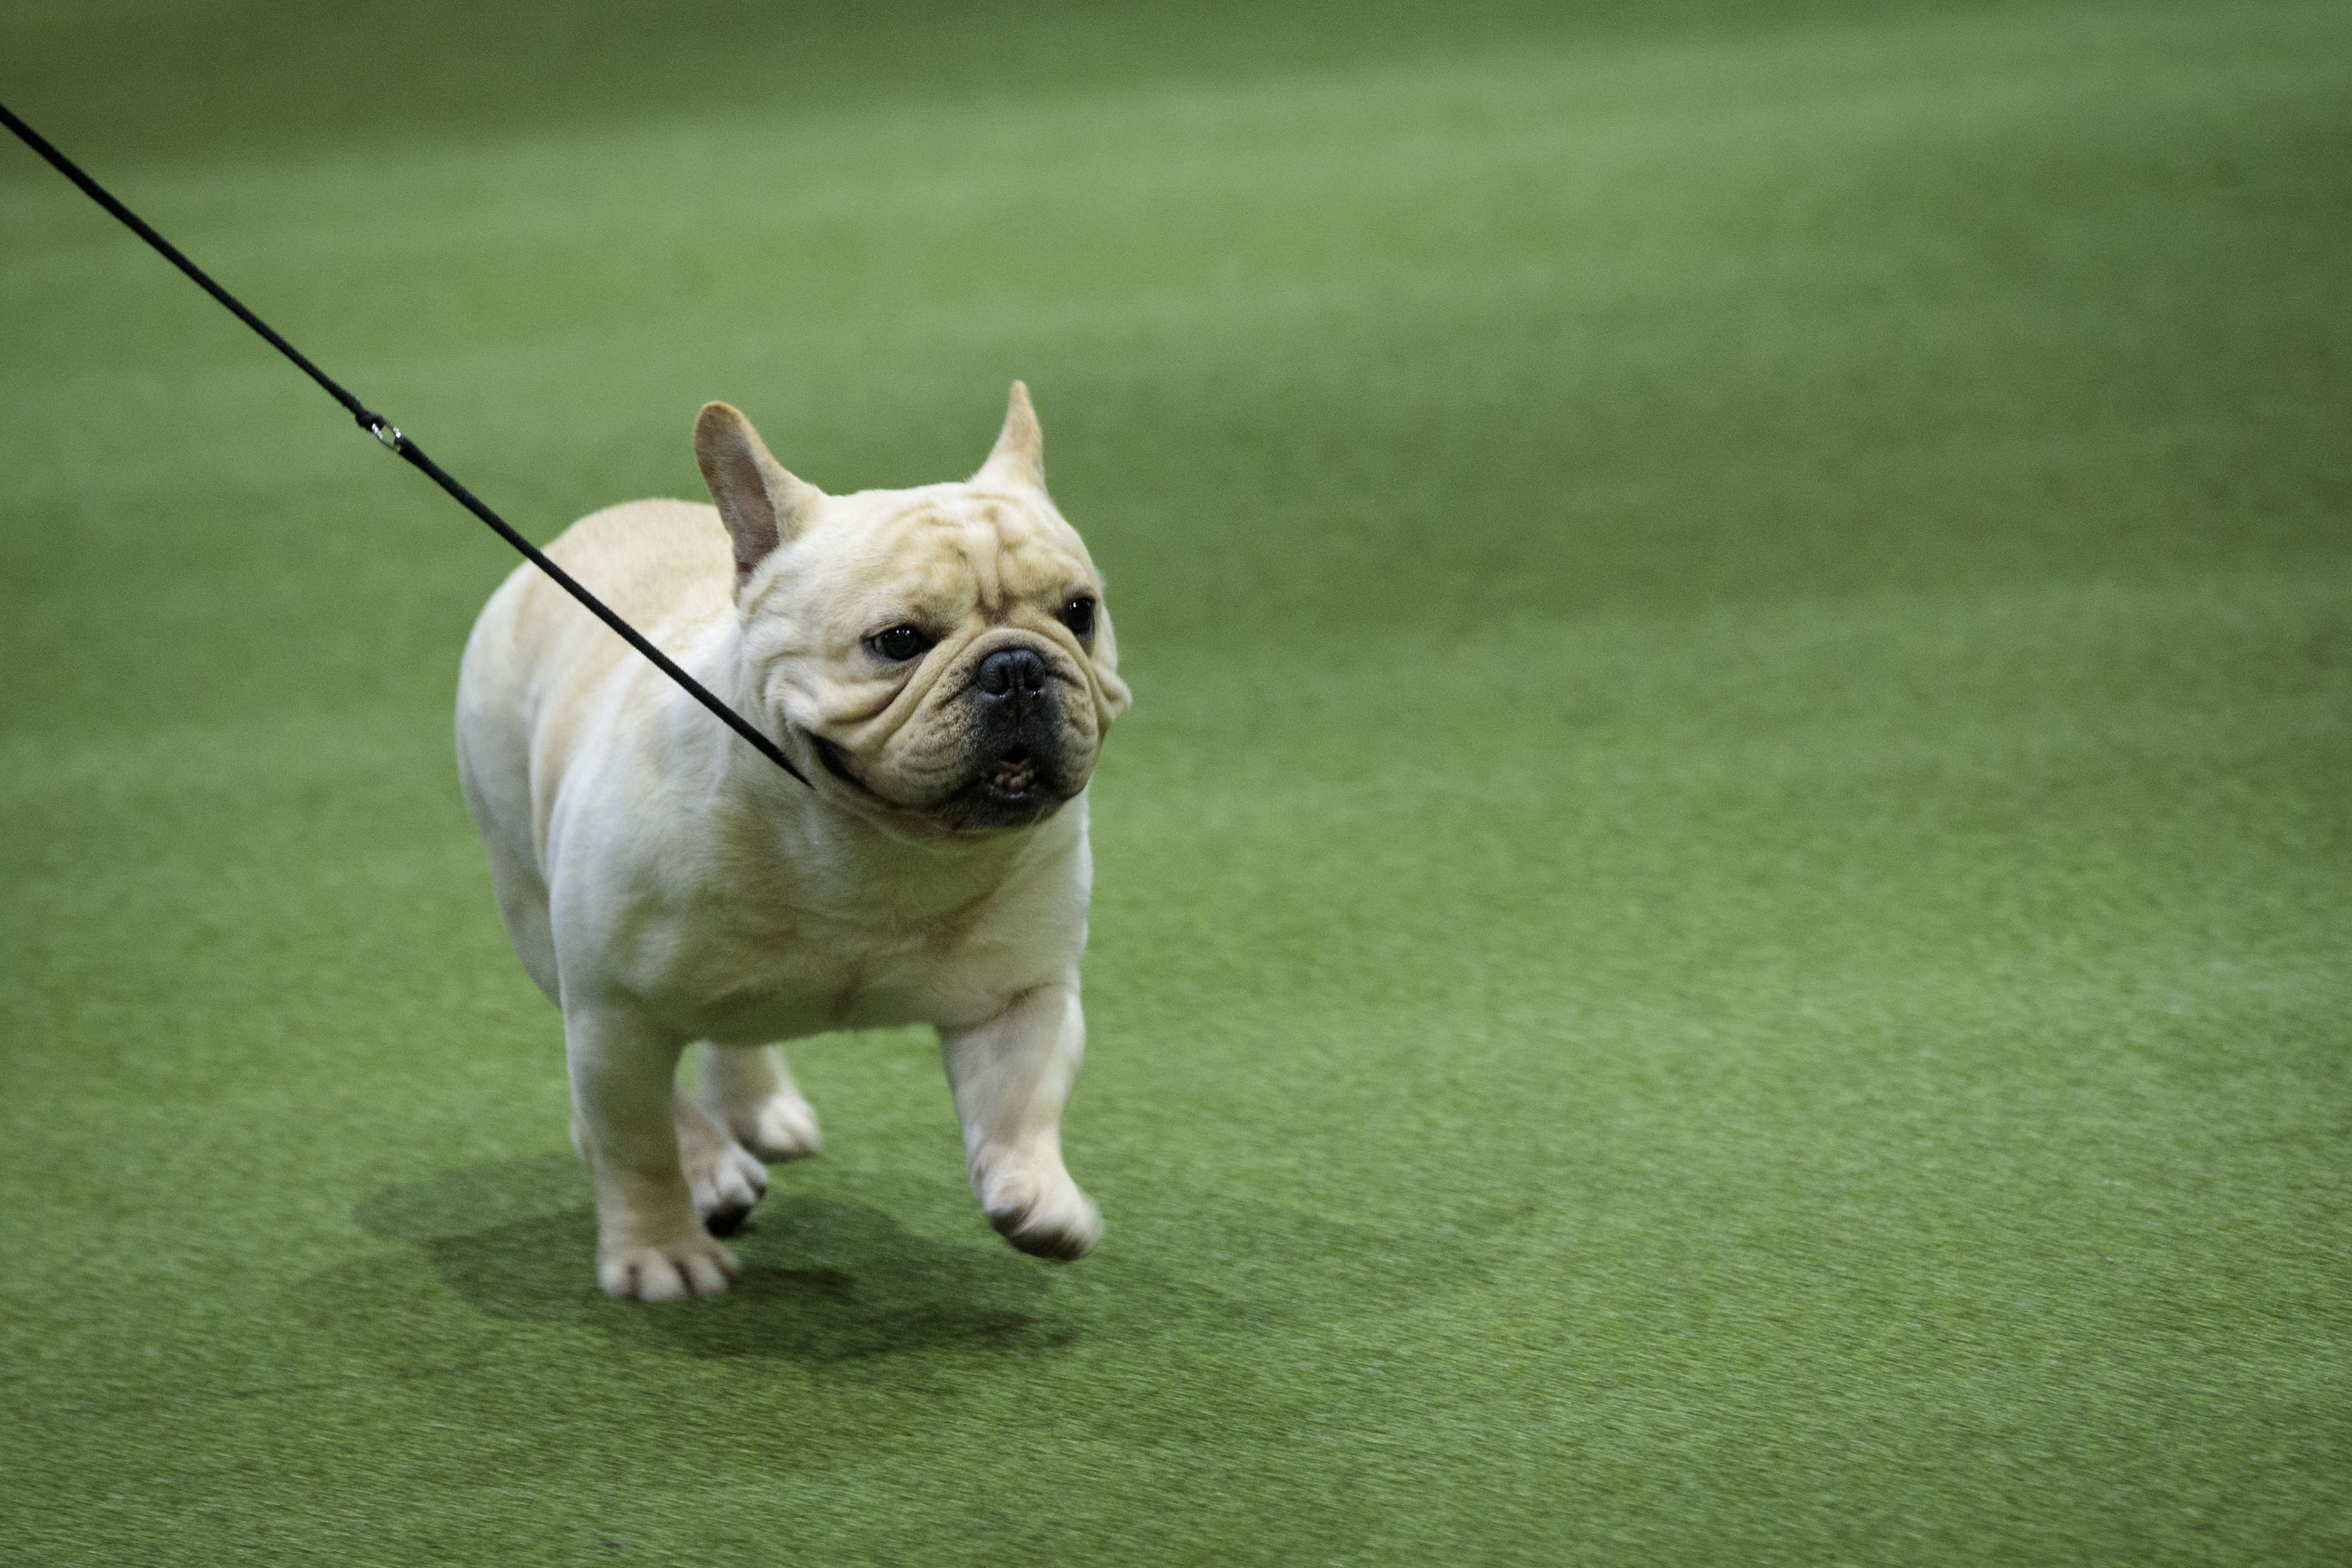 Annual Westminster Dog Show Takes Place In New York City